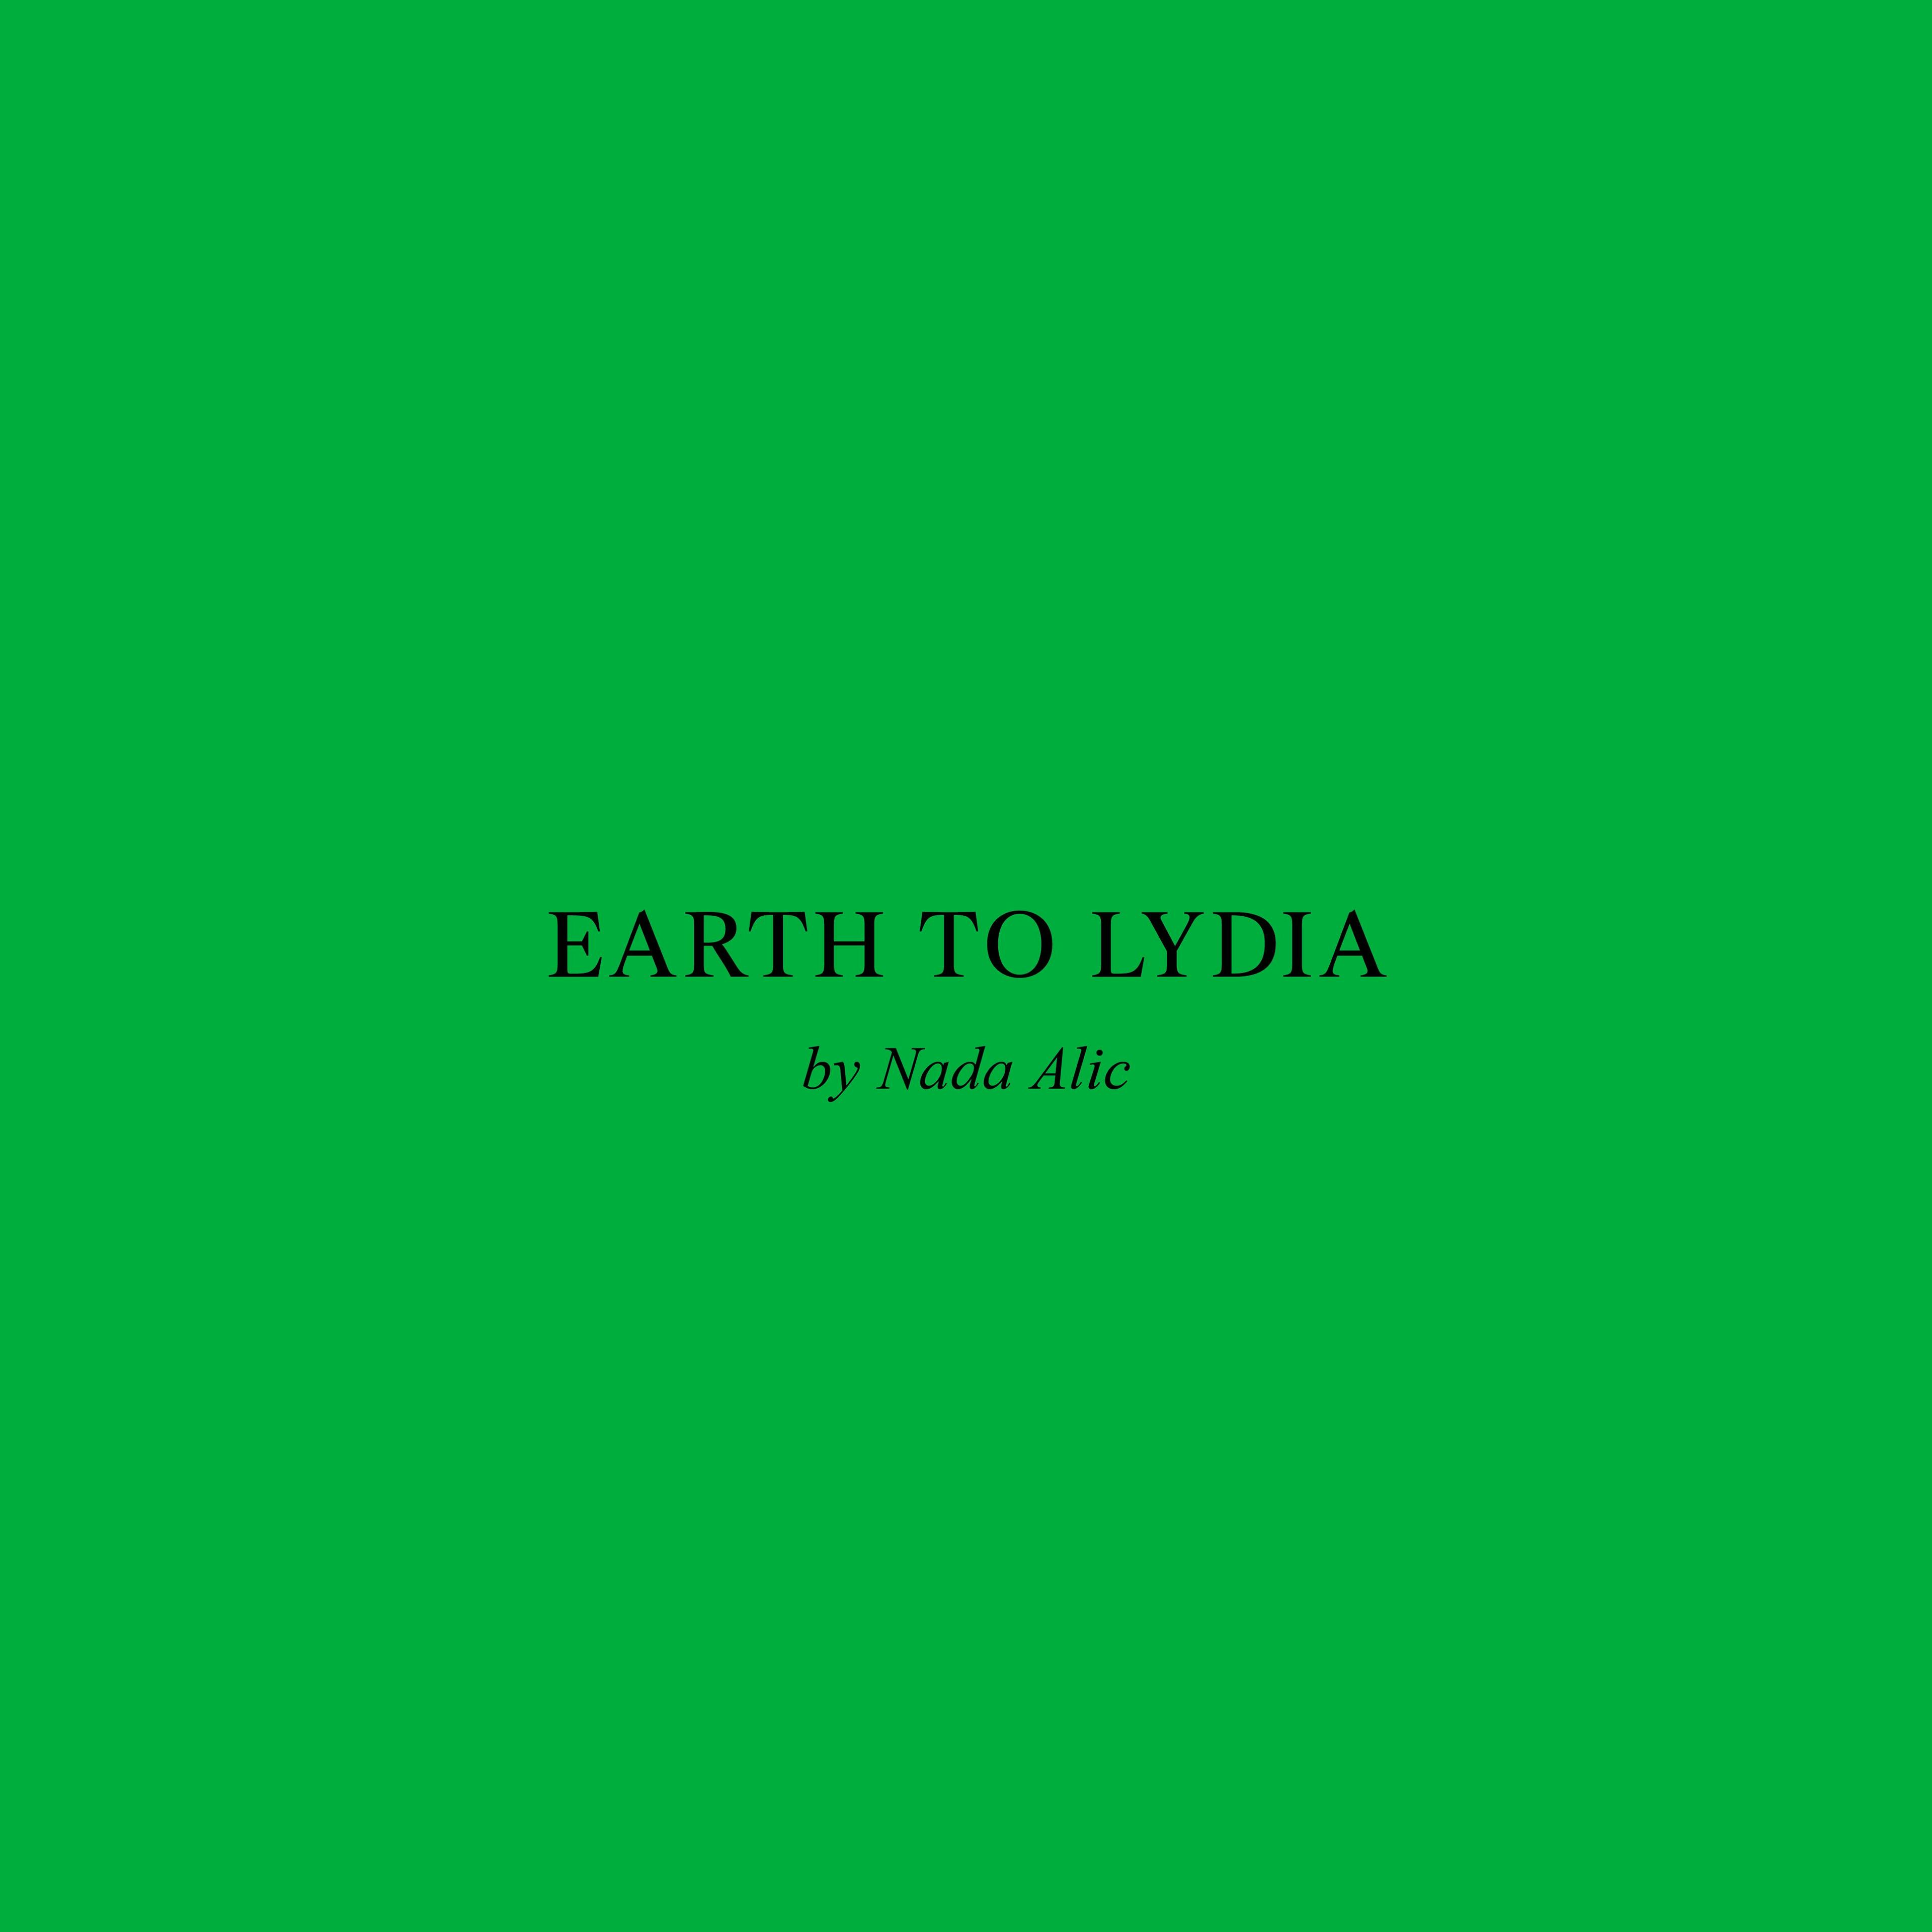 Earth to Lydia